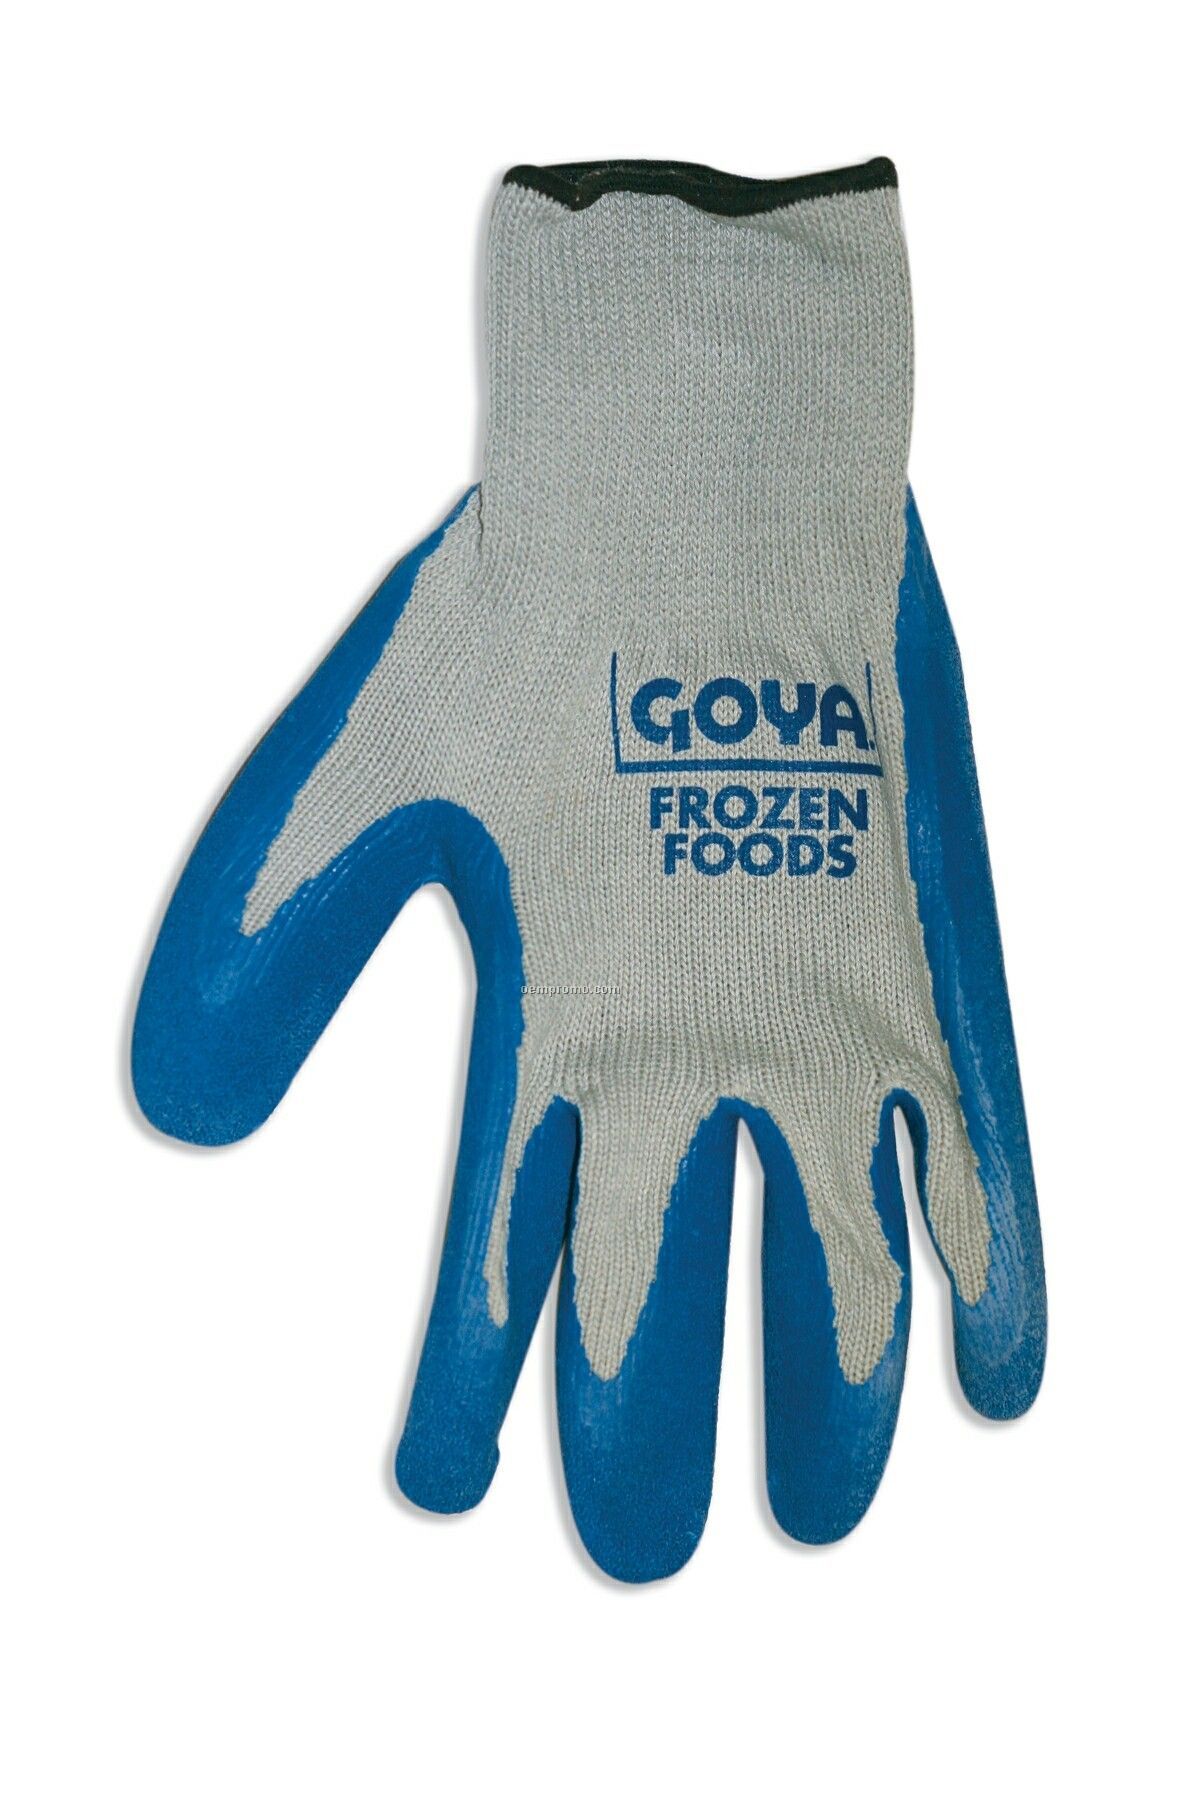 String Knit Glove With Rubber Latex Dipped Palm